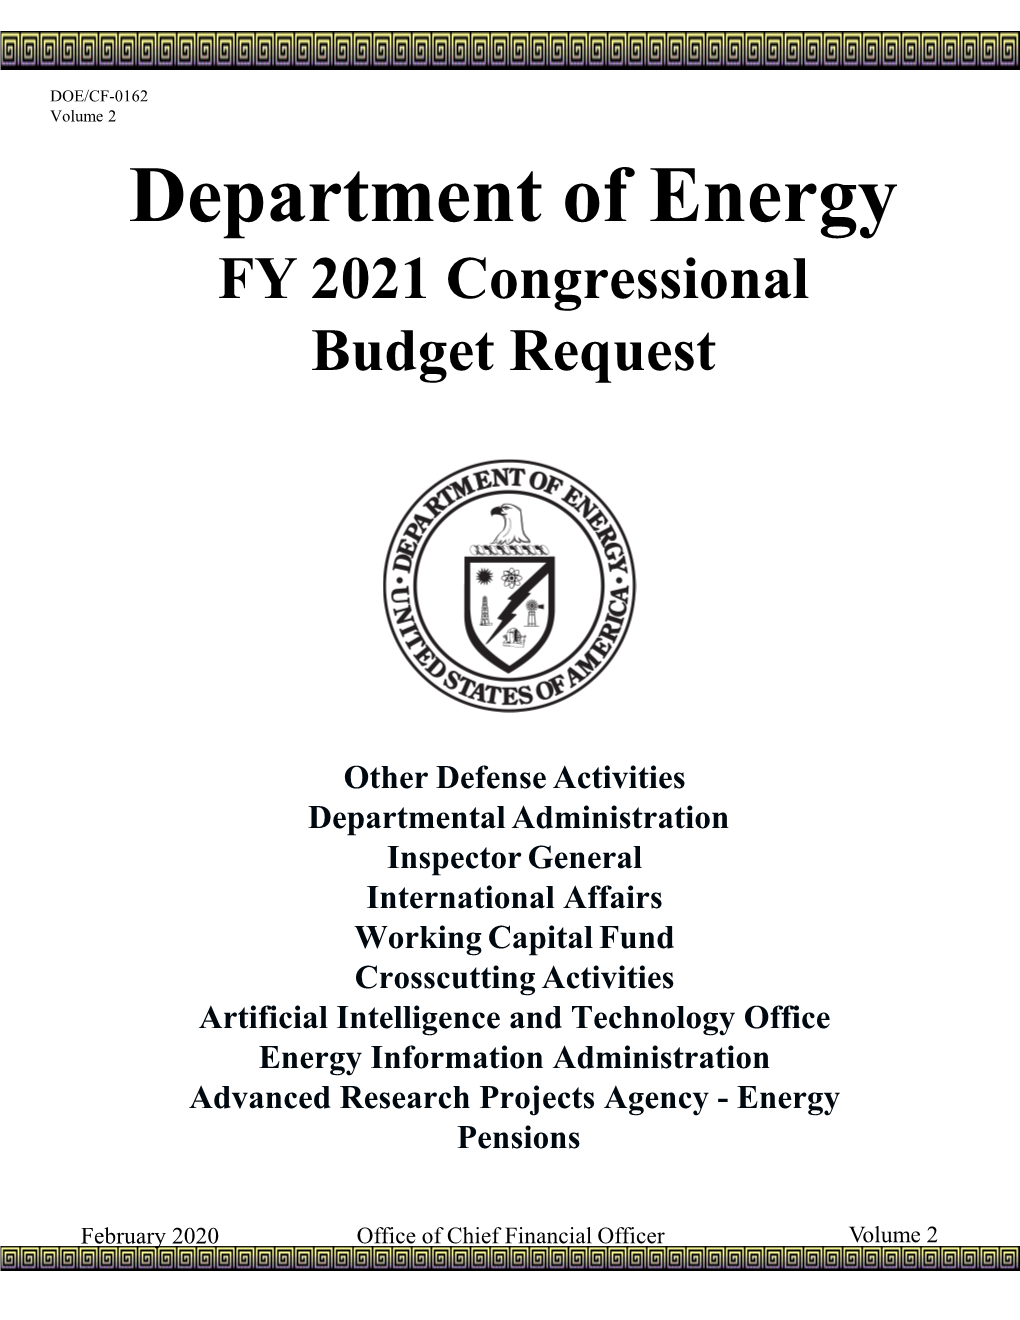 FY 2021 Congressional Budget Request